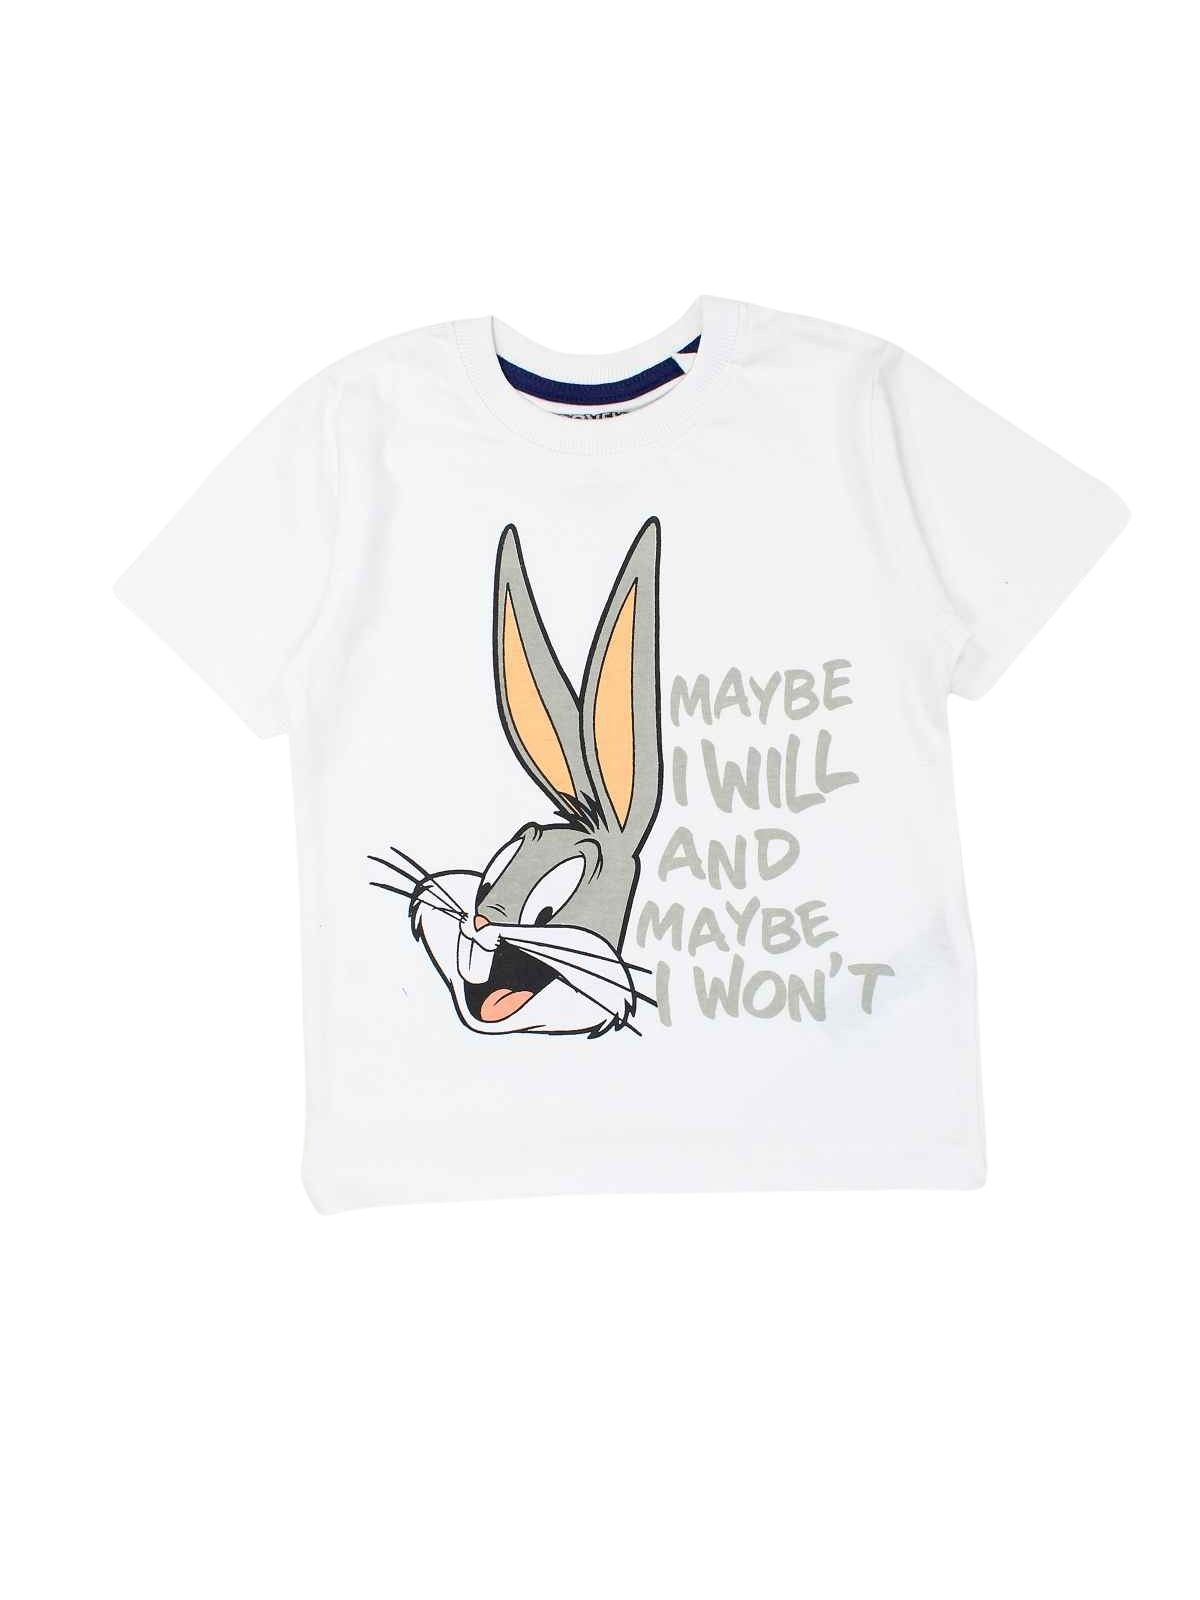 Bugs Bunny Clothing of 2 pieces 